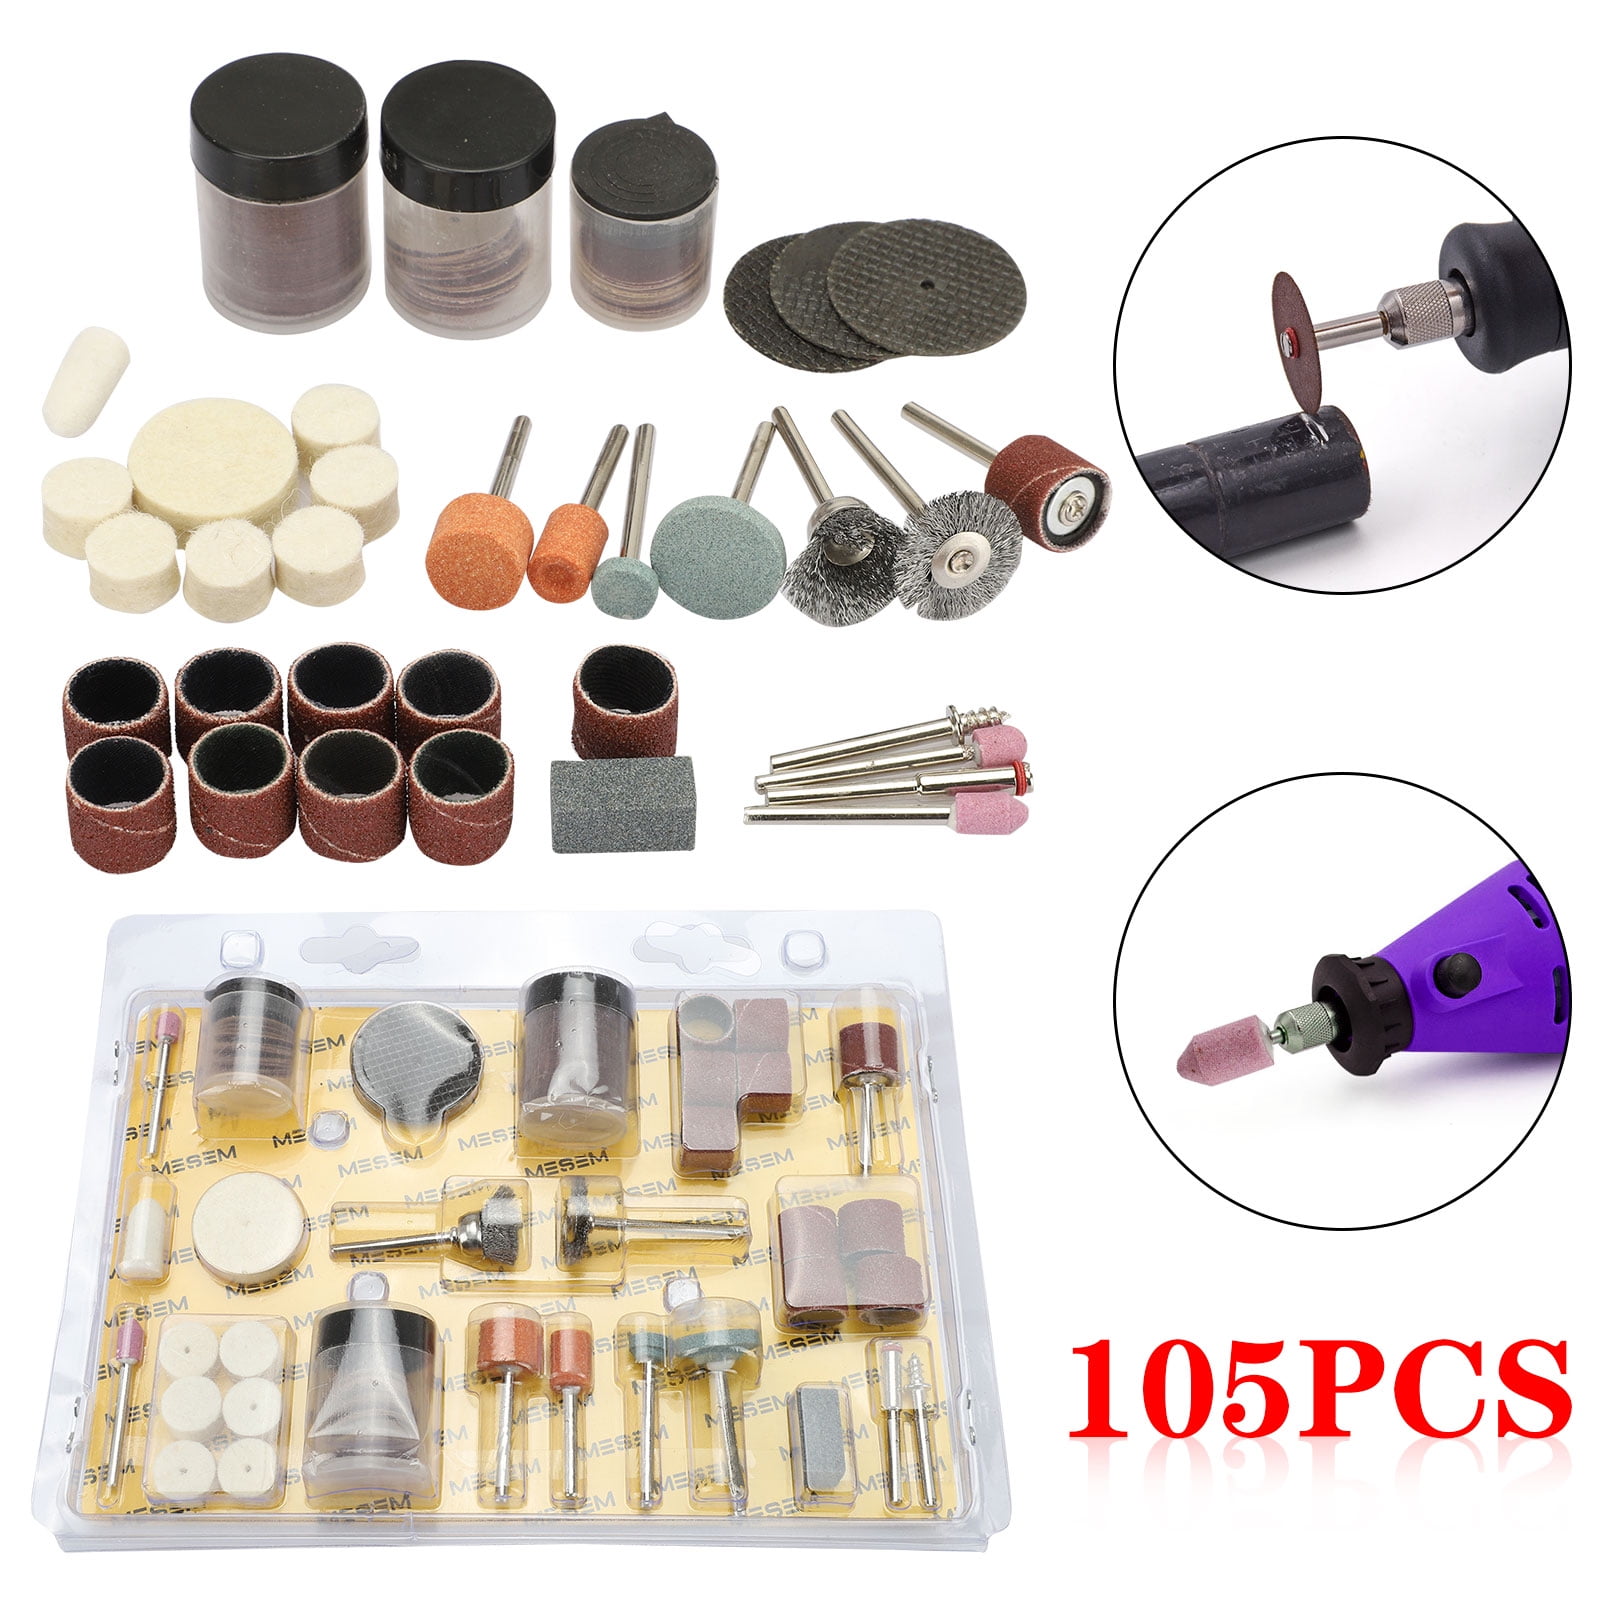 TSV 105pcs Mini Rotary Tool Kit Accessories Set, Multi-Purpose Rotary Power  Tool for Wood Jewel Stone Small Crafts Cutting Drilling Grinding Engraving  